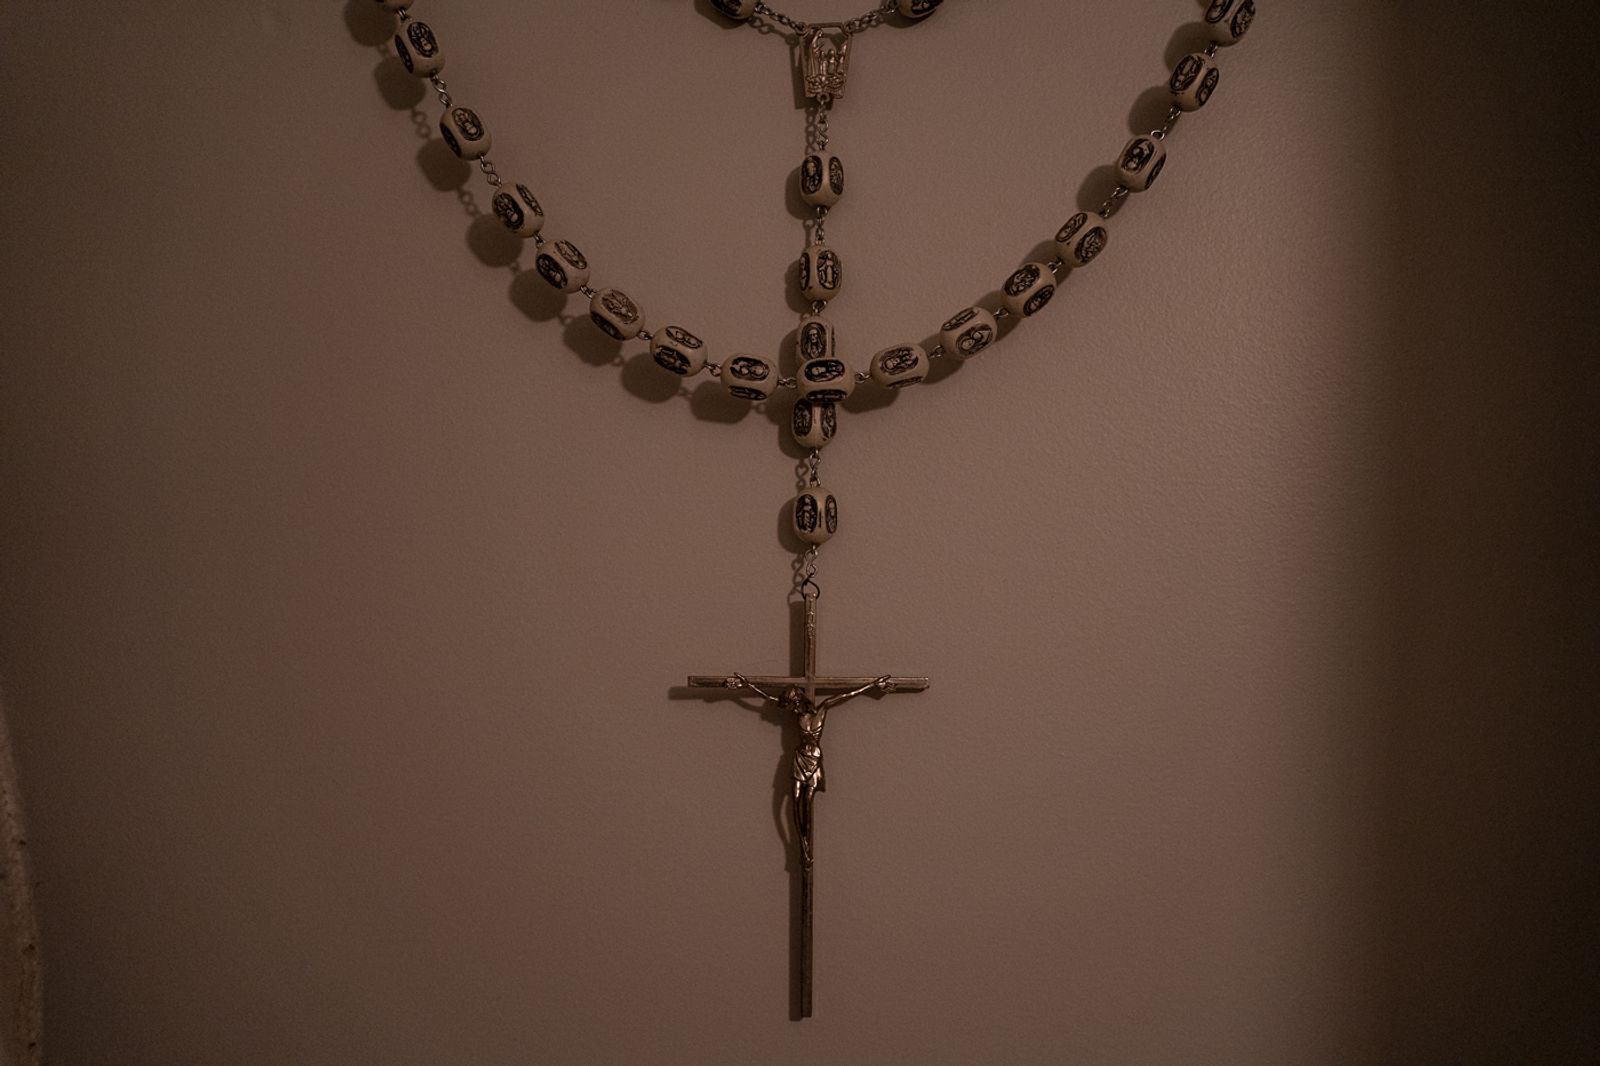 © Bobbi Barbarich - A large rosary hangs on the wall in her bedroom.